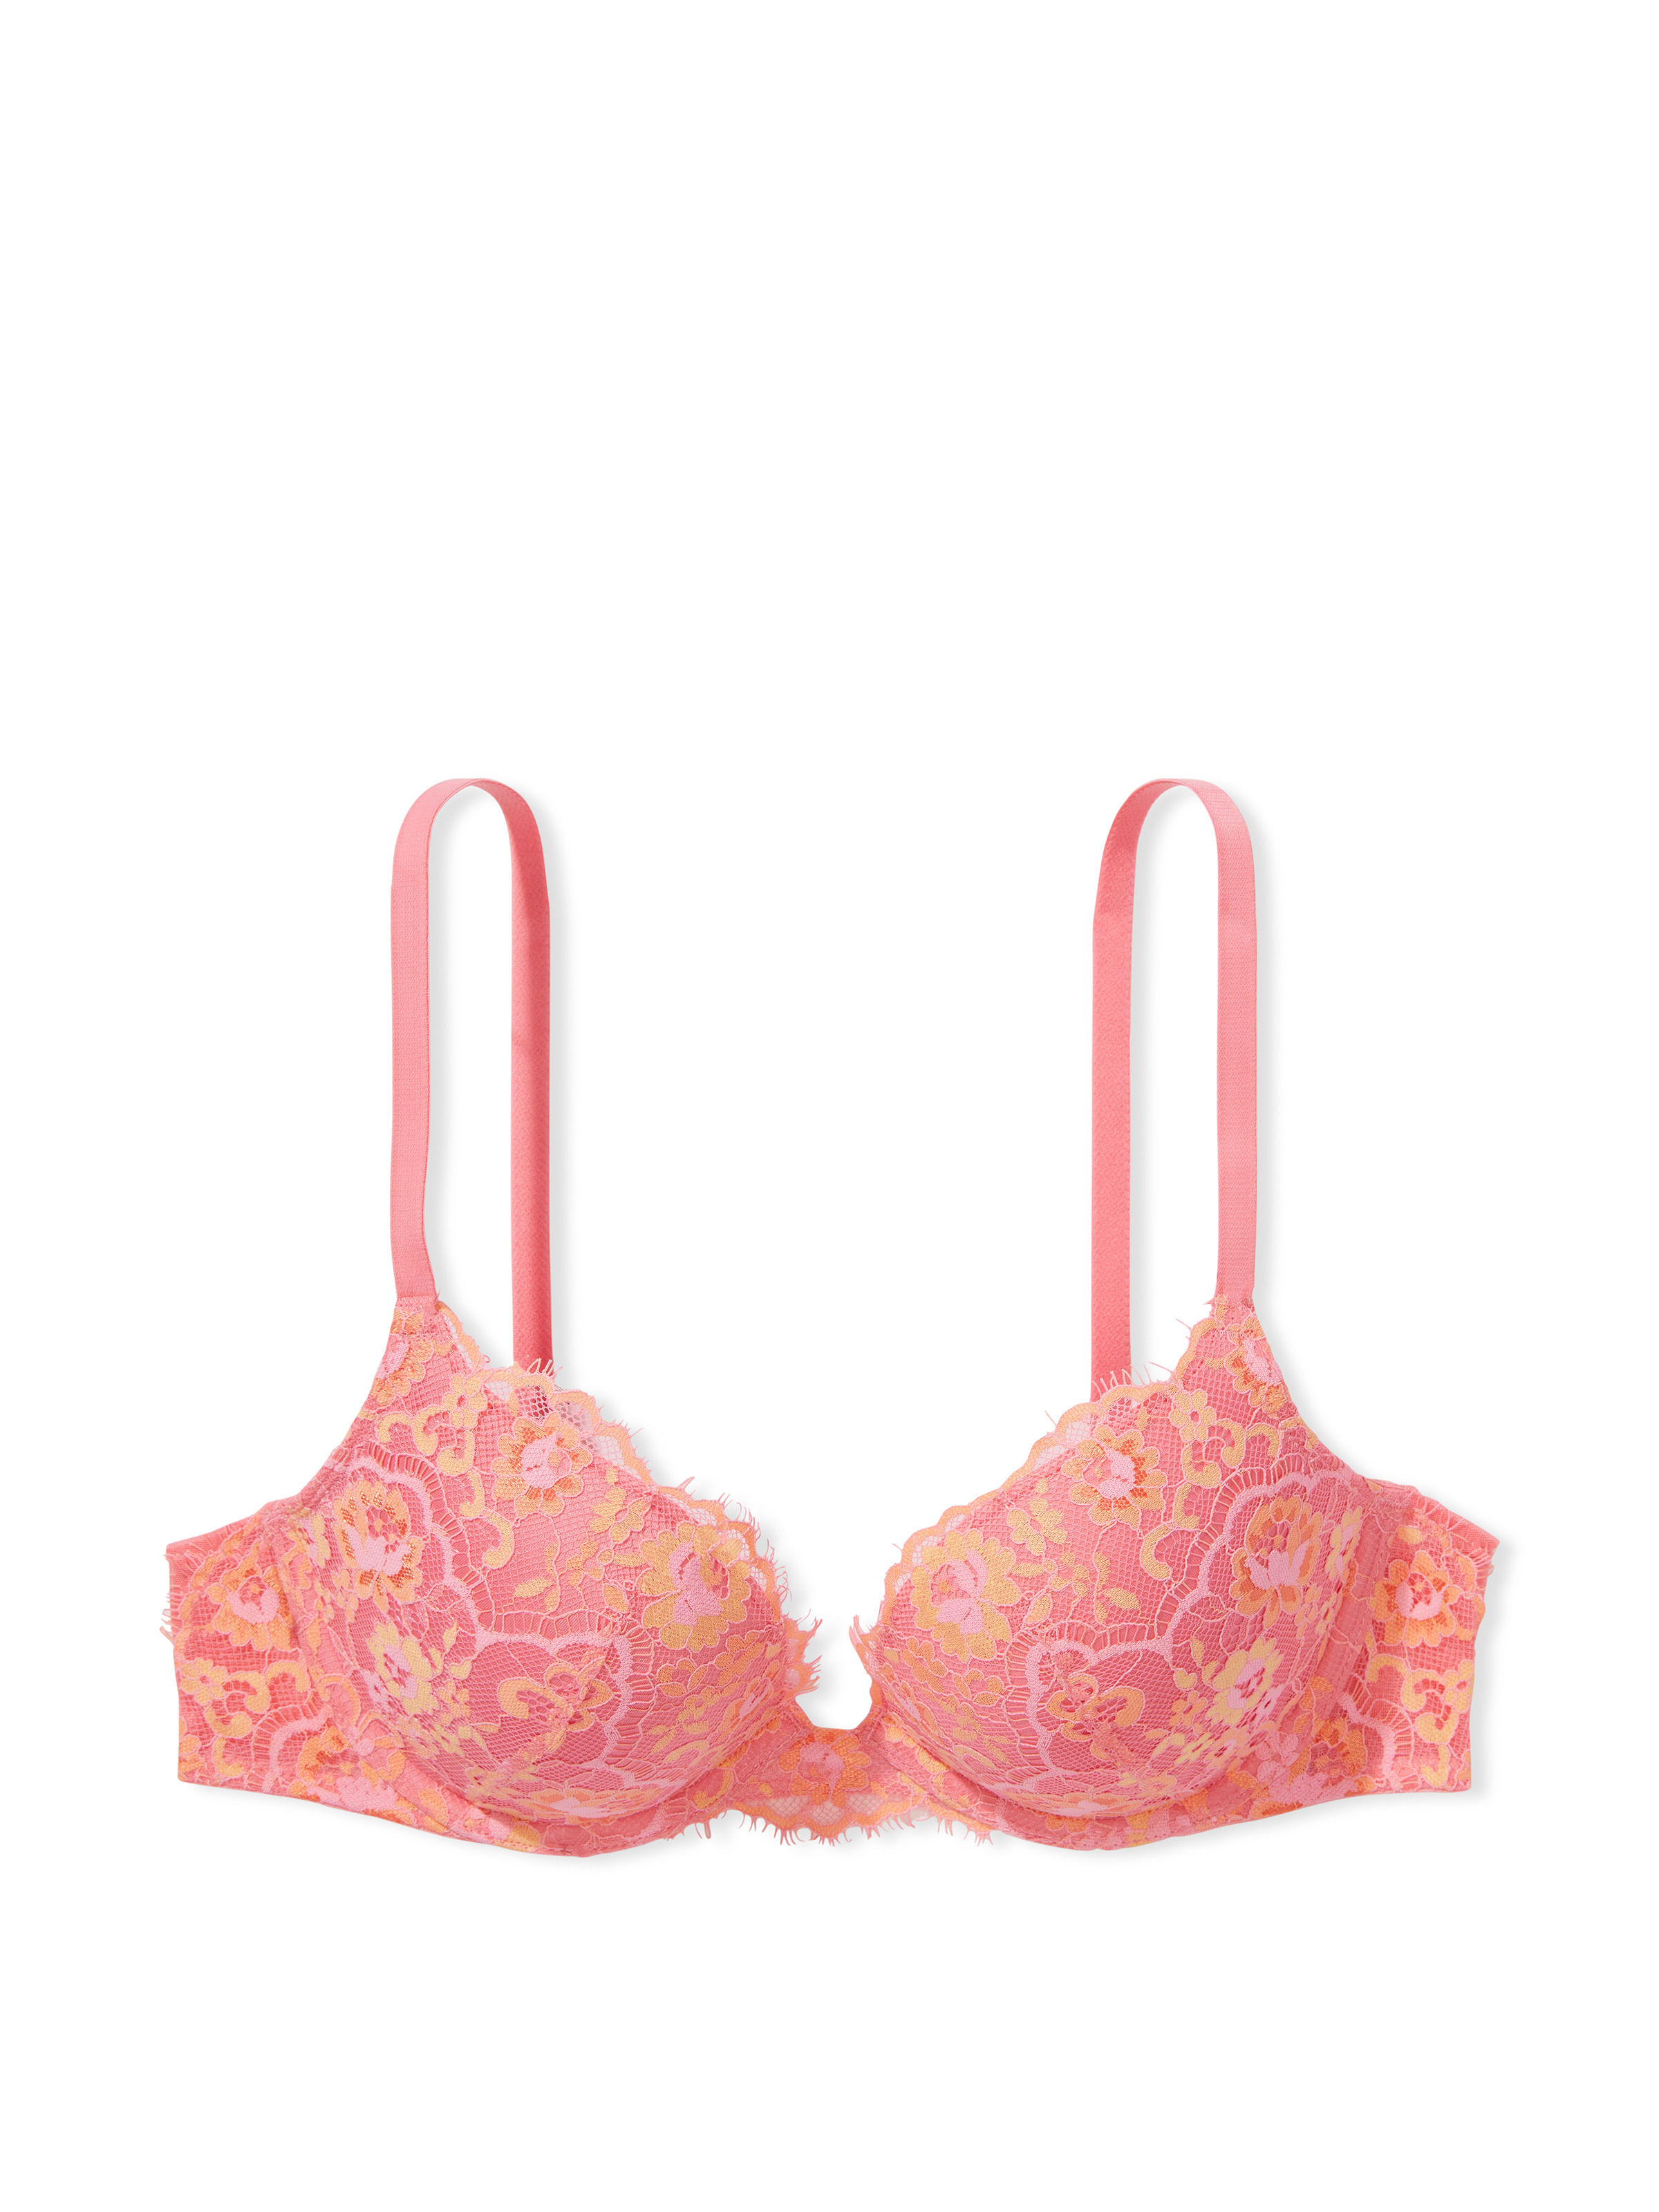 Buy Victoria's Secret Cocktail Pink Lace Unlined Bralette from